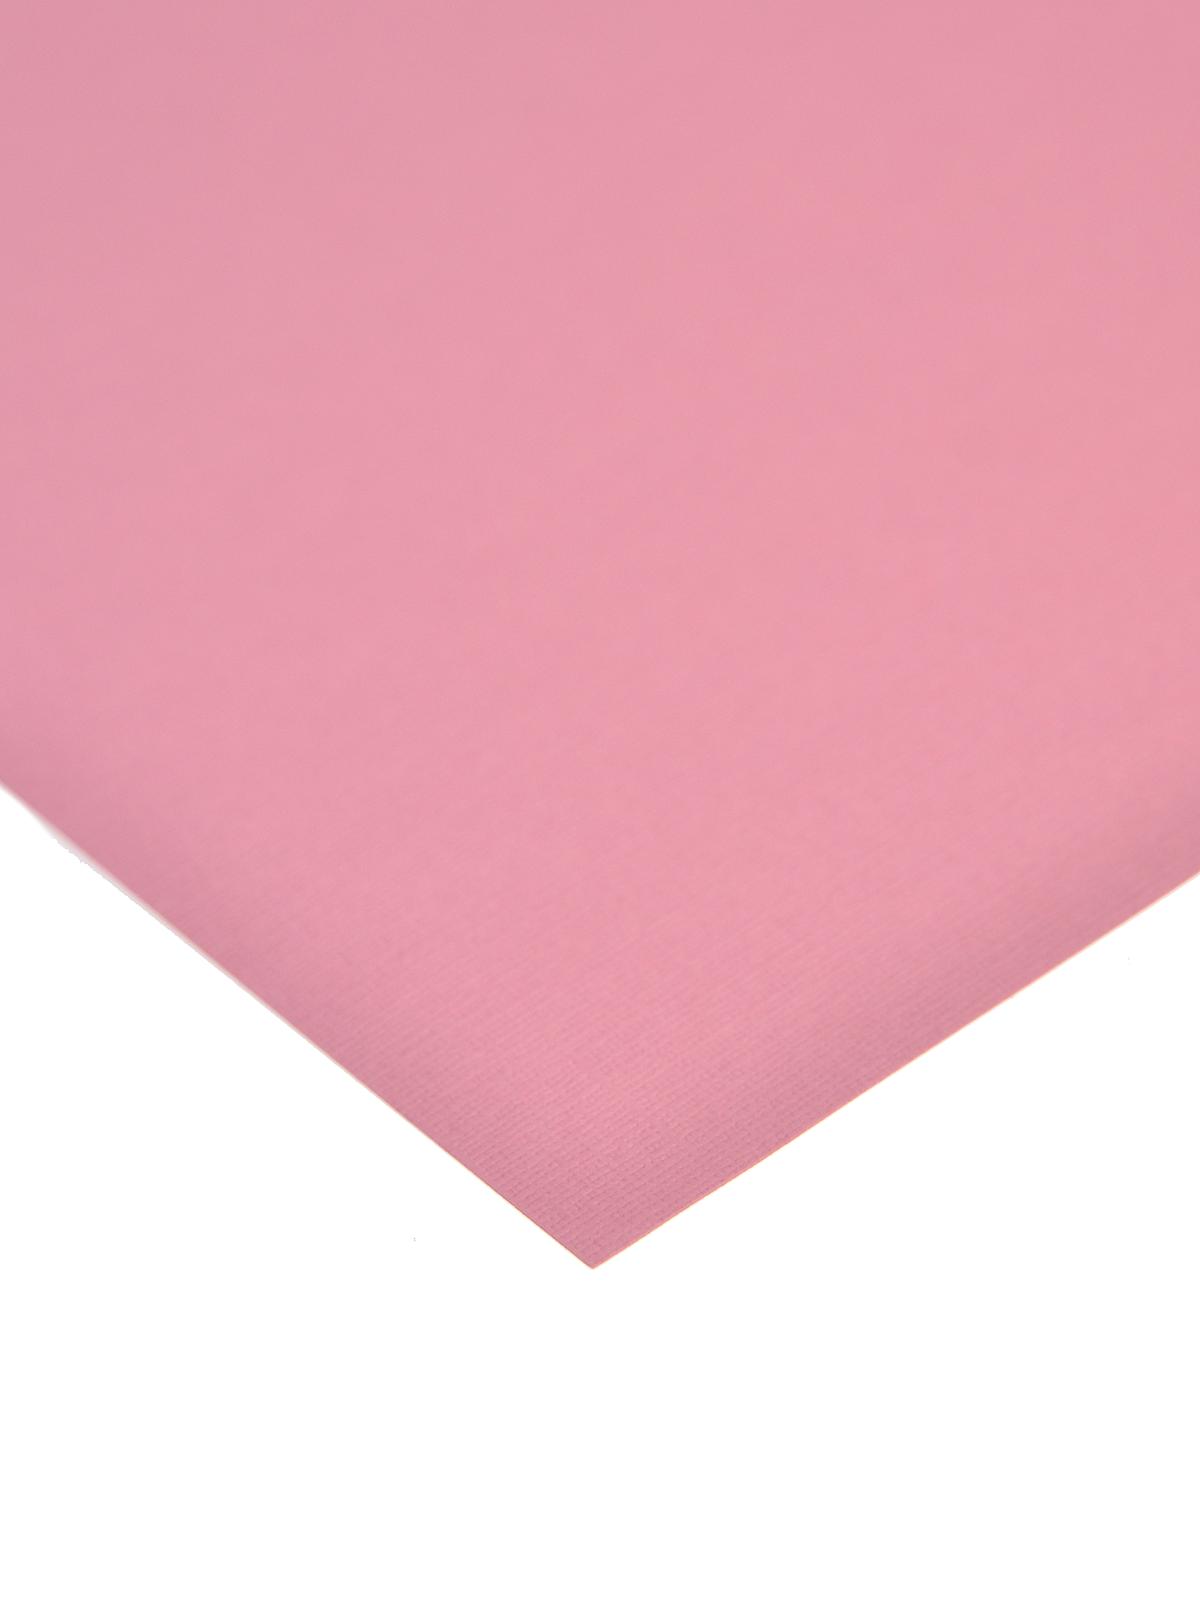 80 Lb. Canvas 8.5 In. X 11 In. Sheet Coral Rose